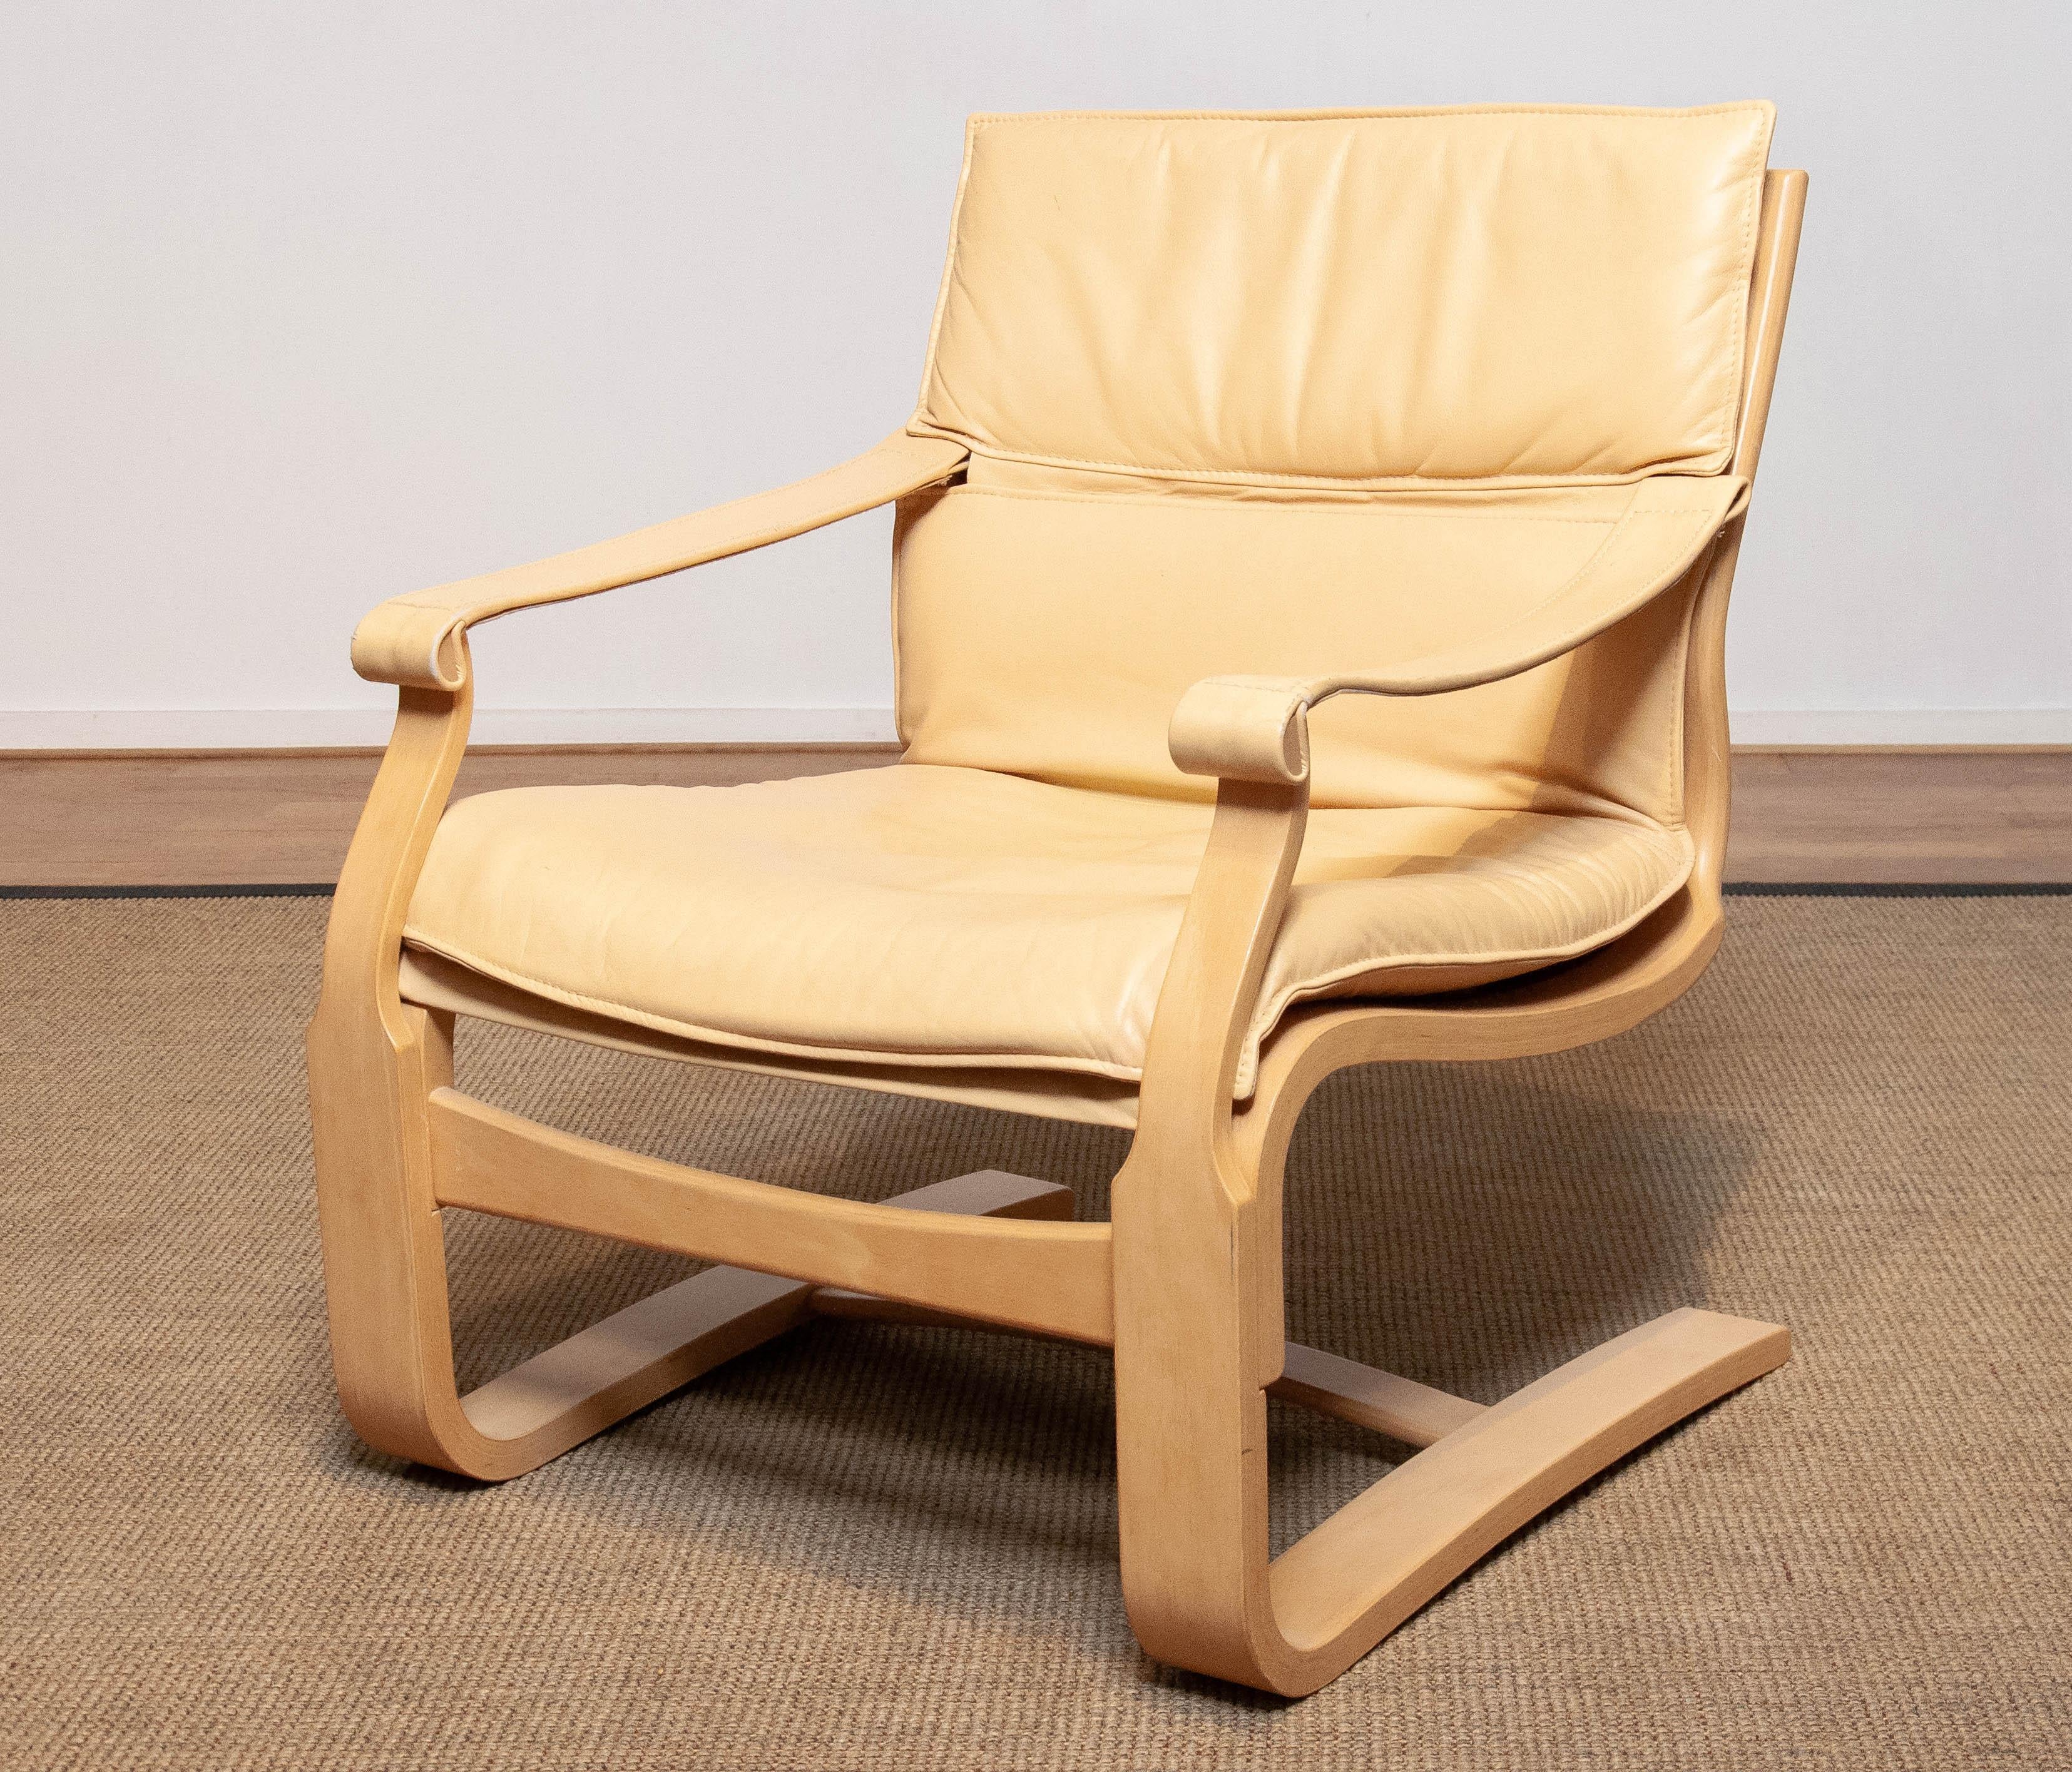 Scandinavian Modern Bentwood with Beige / Creme Leather Lounge Easy Chair by Ake Fribytter for Nelo For Sale